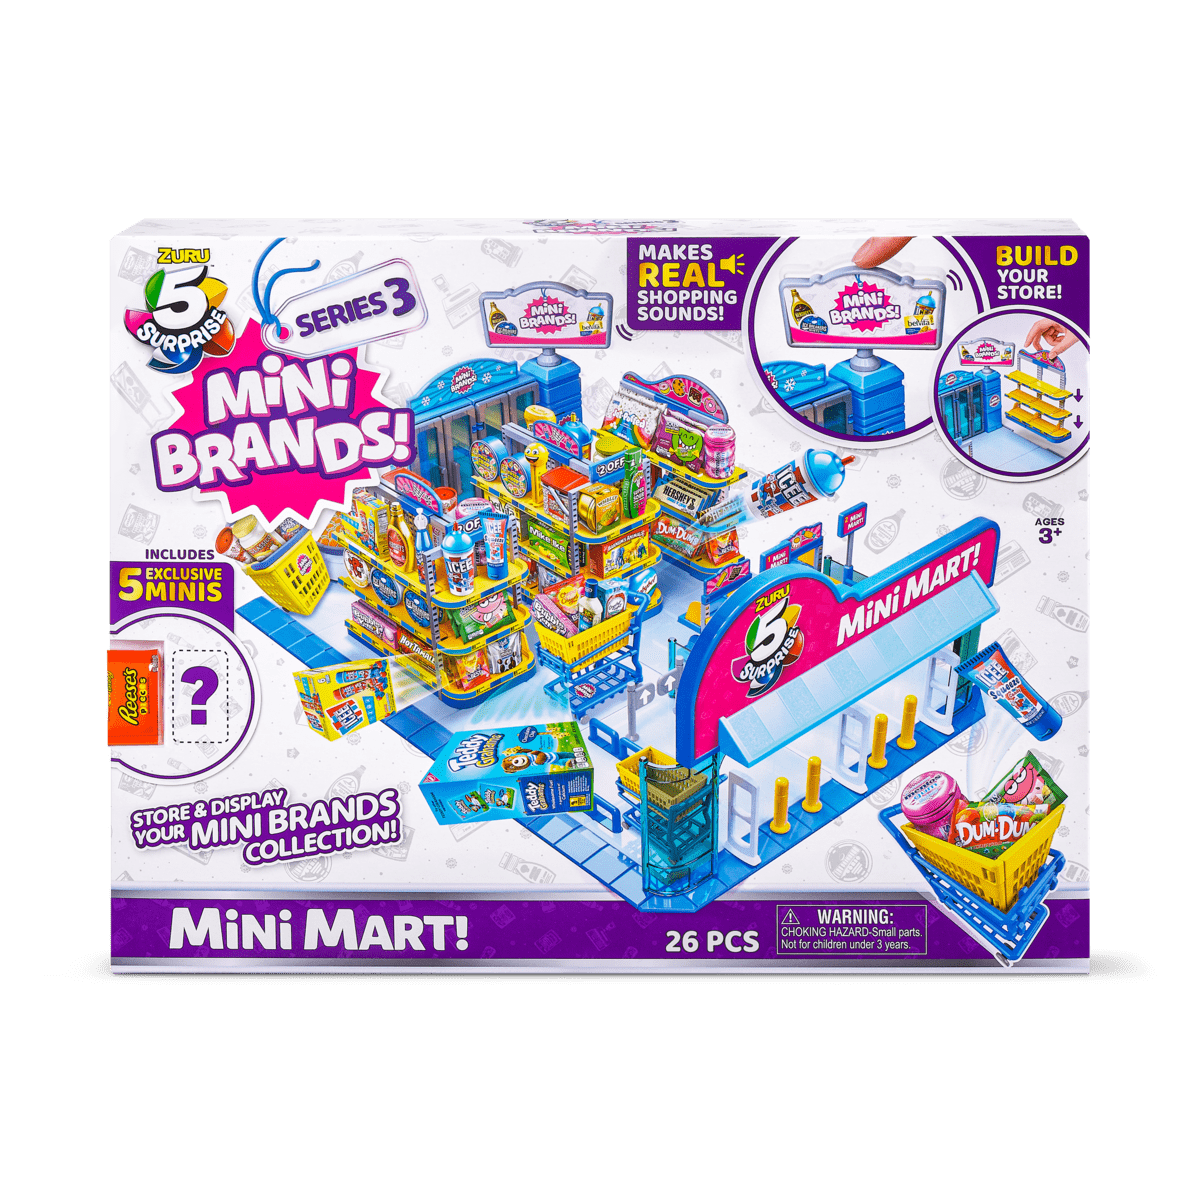 5 Surprise Toy Mini Brands Collector's Case - Store & Display 30 Minis with  4 Exclusive Minis Included by ZURU